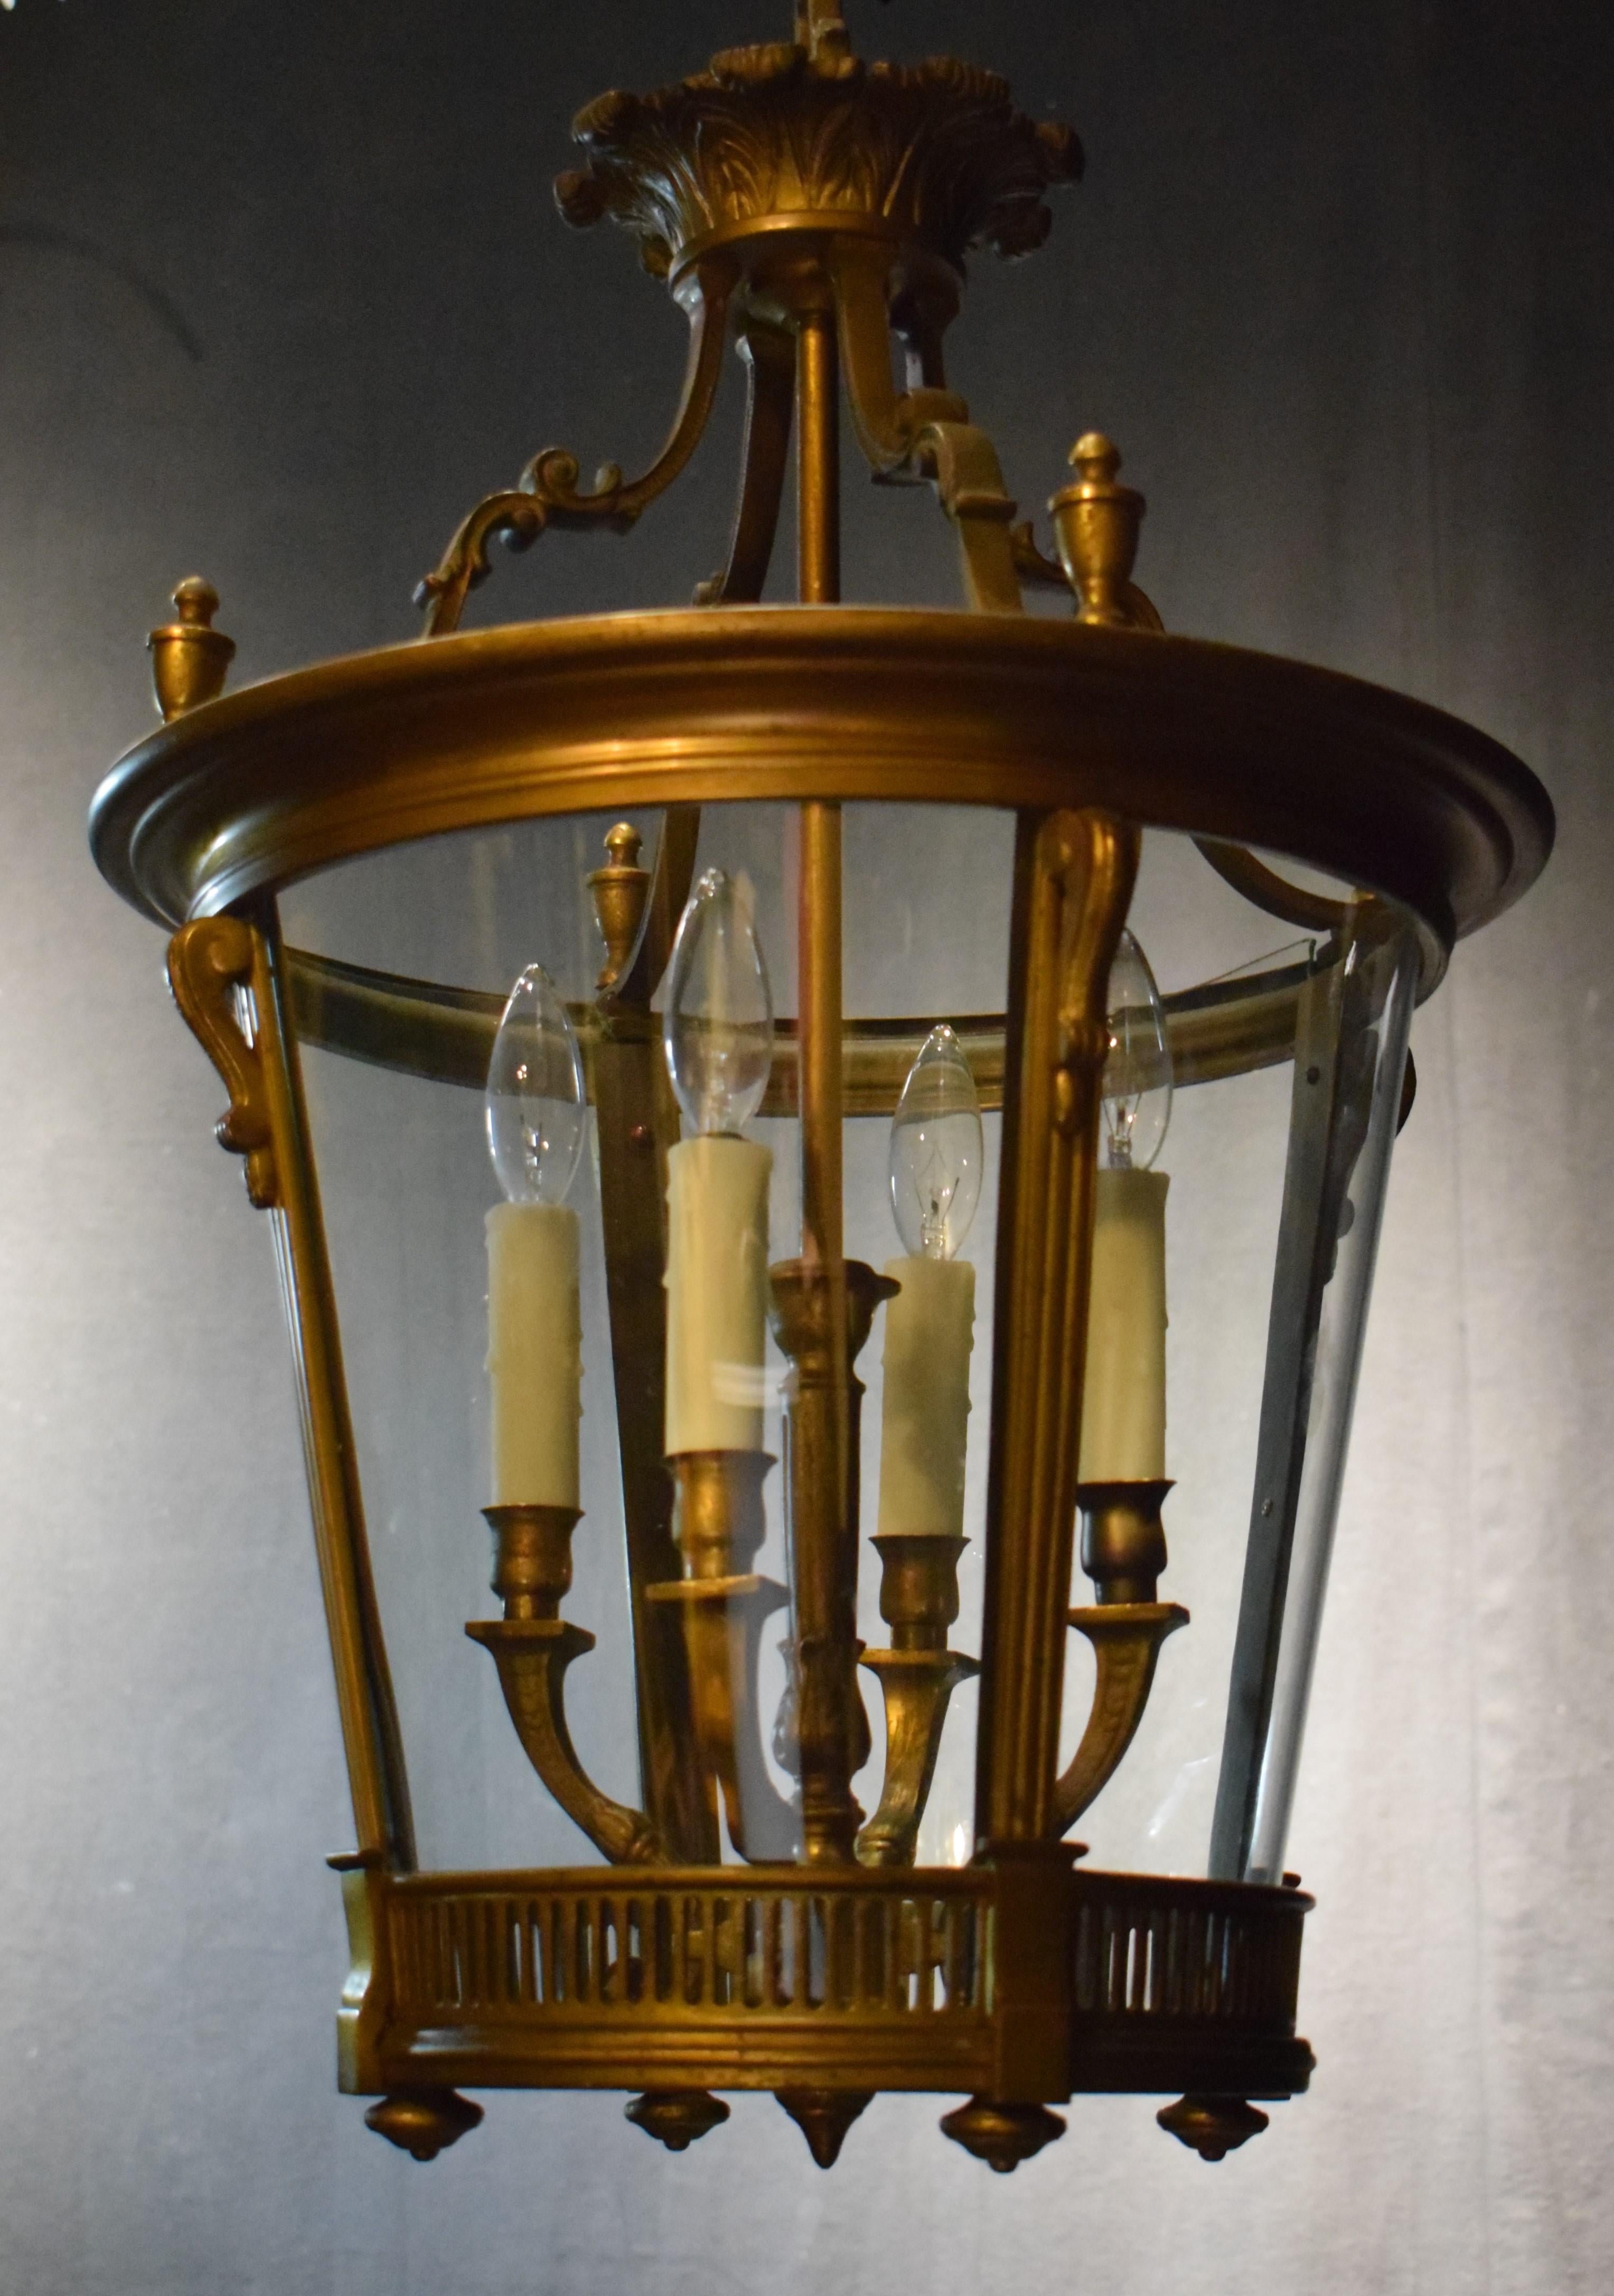 French Superb and Elegant Gilt Bronze Lantern with Curved Glass Panels